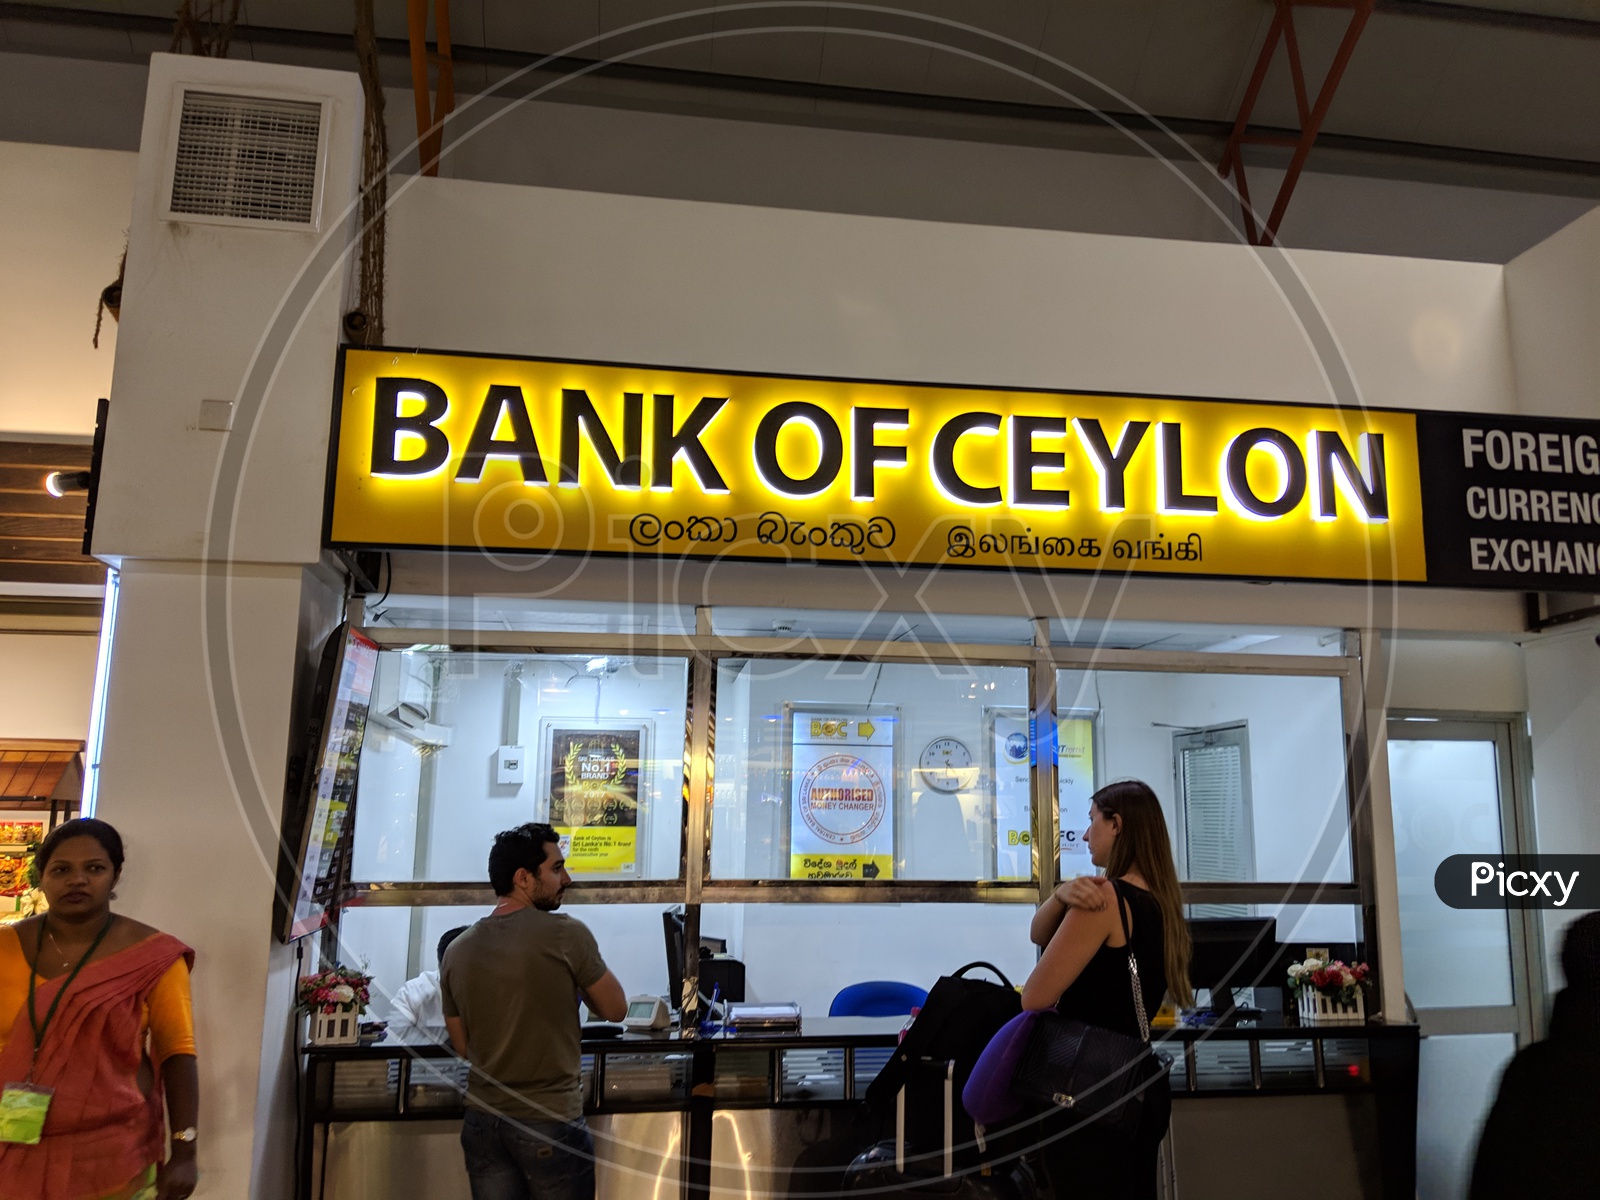 Bank of Ceylon's foreign currency exchange booth at Colombo Airport